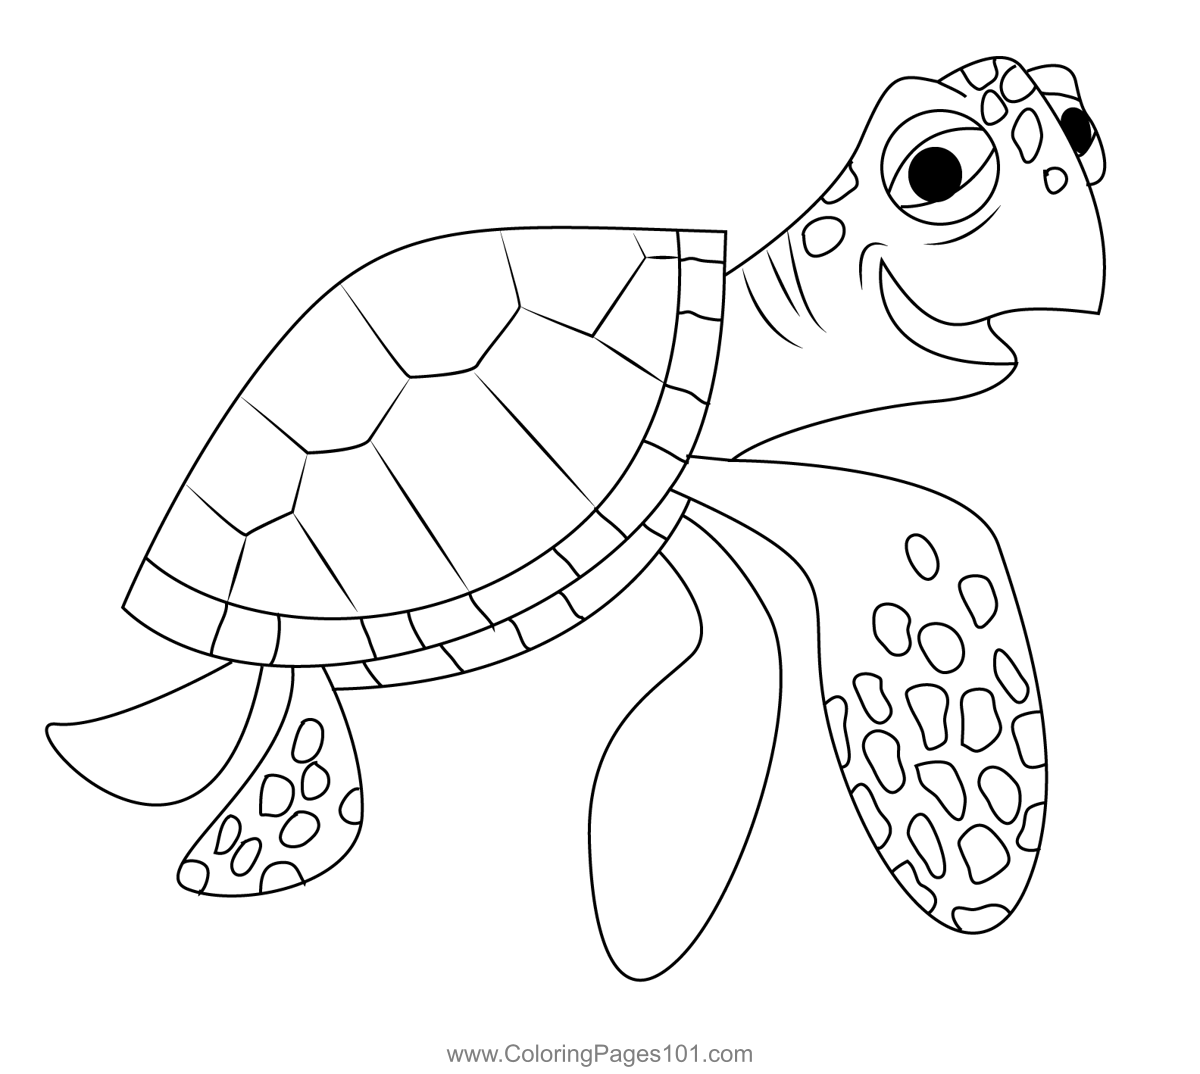 Crush The Turtle Coloring Page for Kids - Free Finding Nemo Printable ...